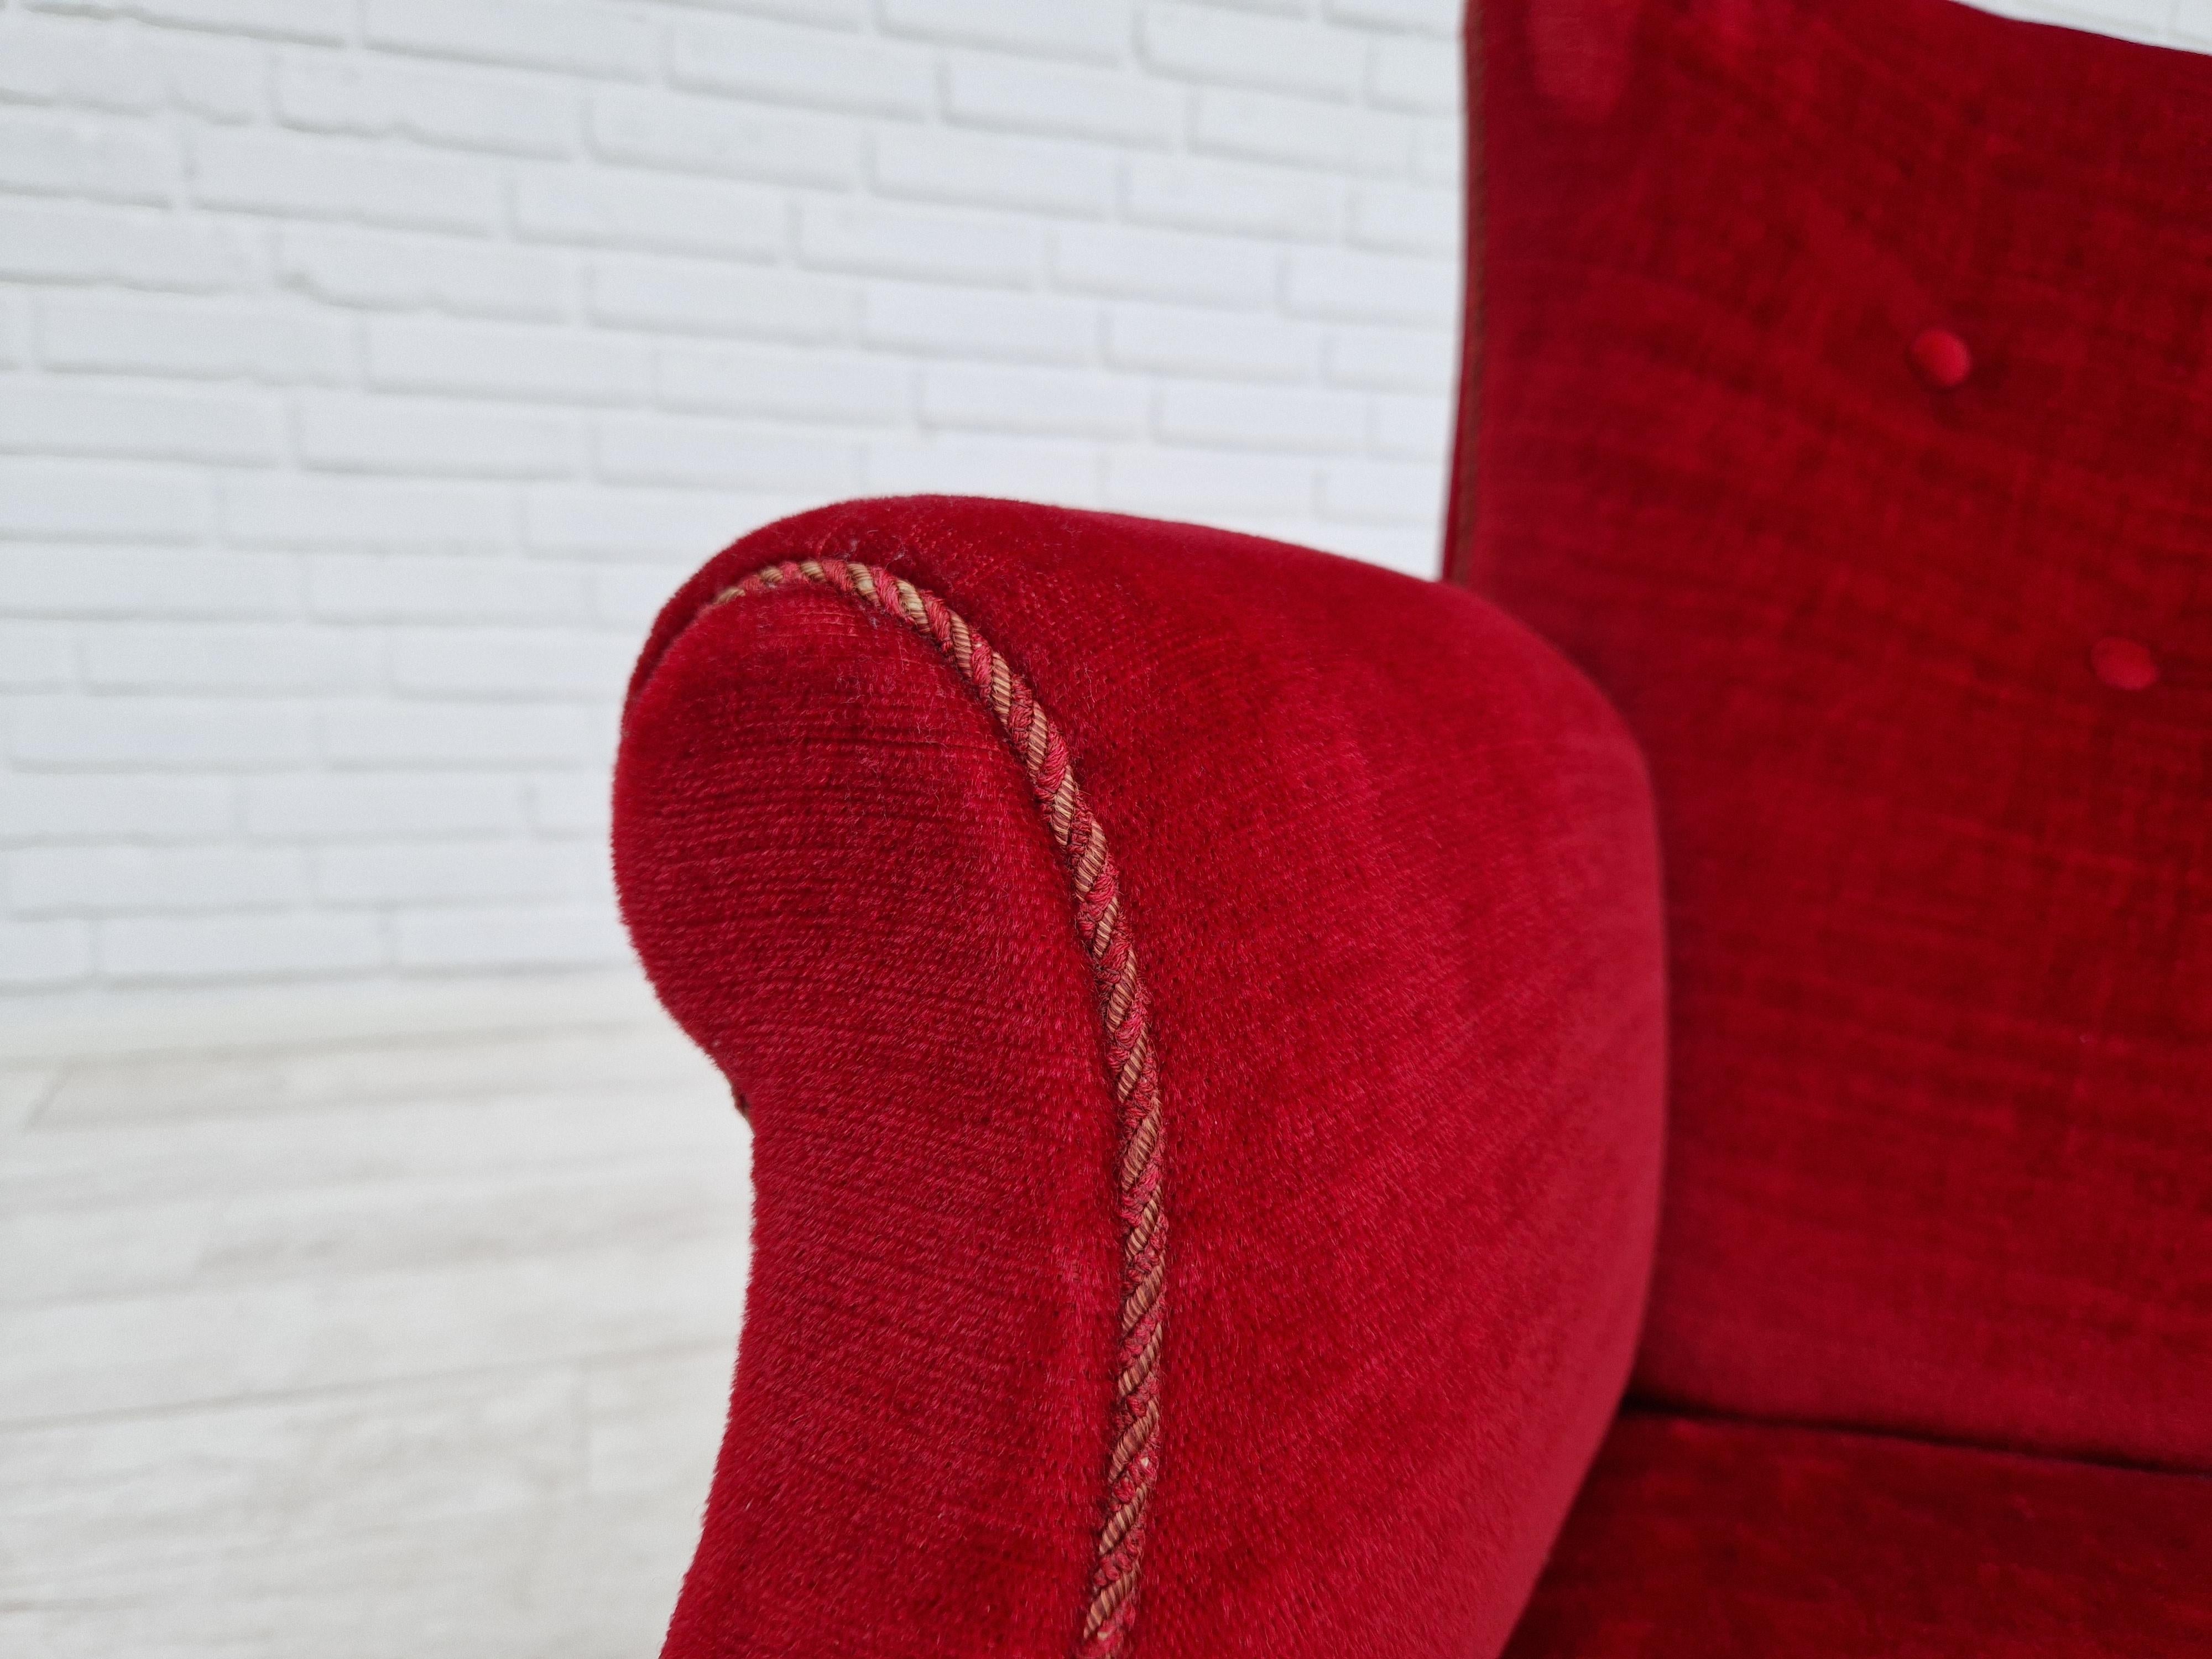 Vintage high back chair of Danish design. Made around 1960 by a Danish furniture manufacturer. Original cherry-red velvet upholstery in good condition, no stains, no odor. Light traces of wear on on the right armrest. Legs in beech. Springs in the